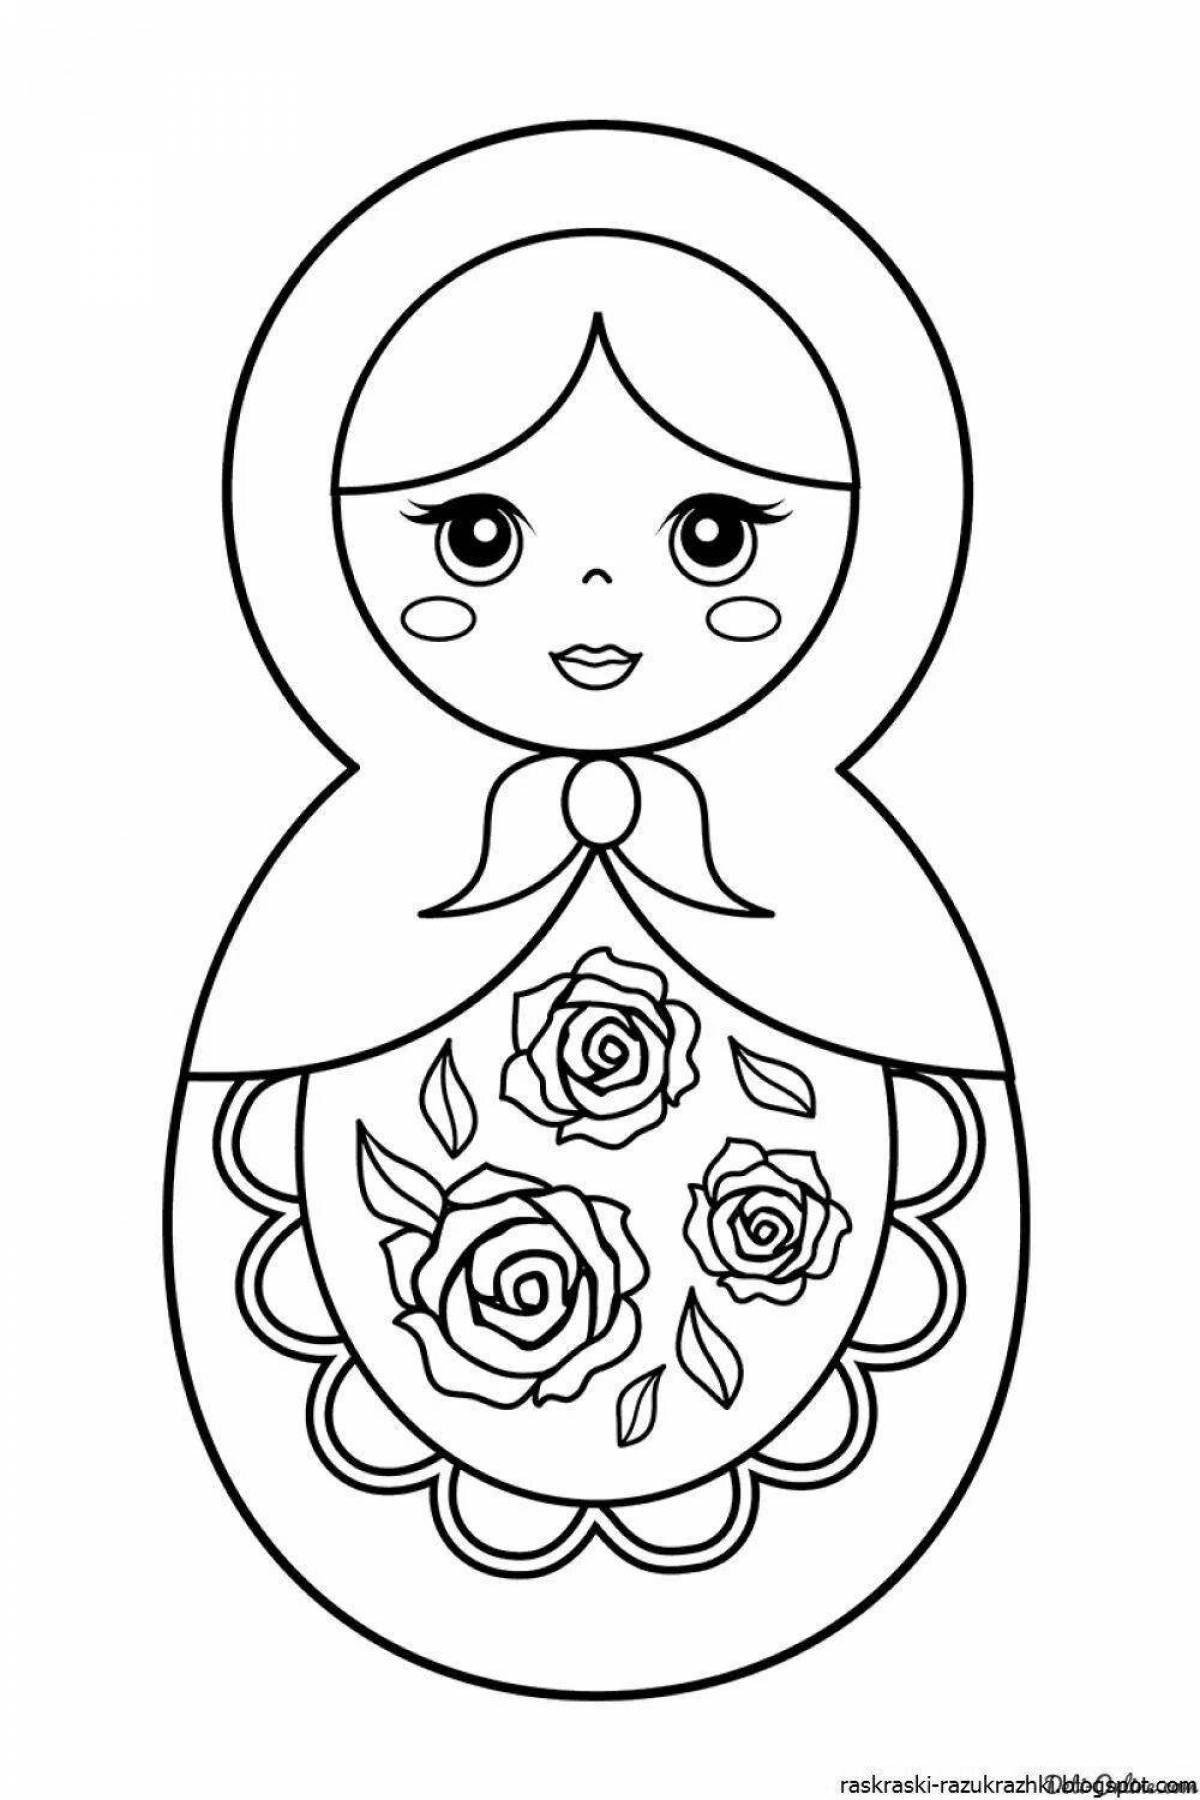 Coloring matryoshka dolls for children 3-4 years old